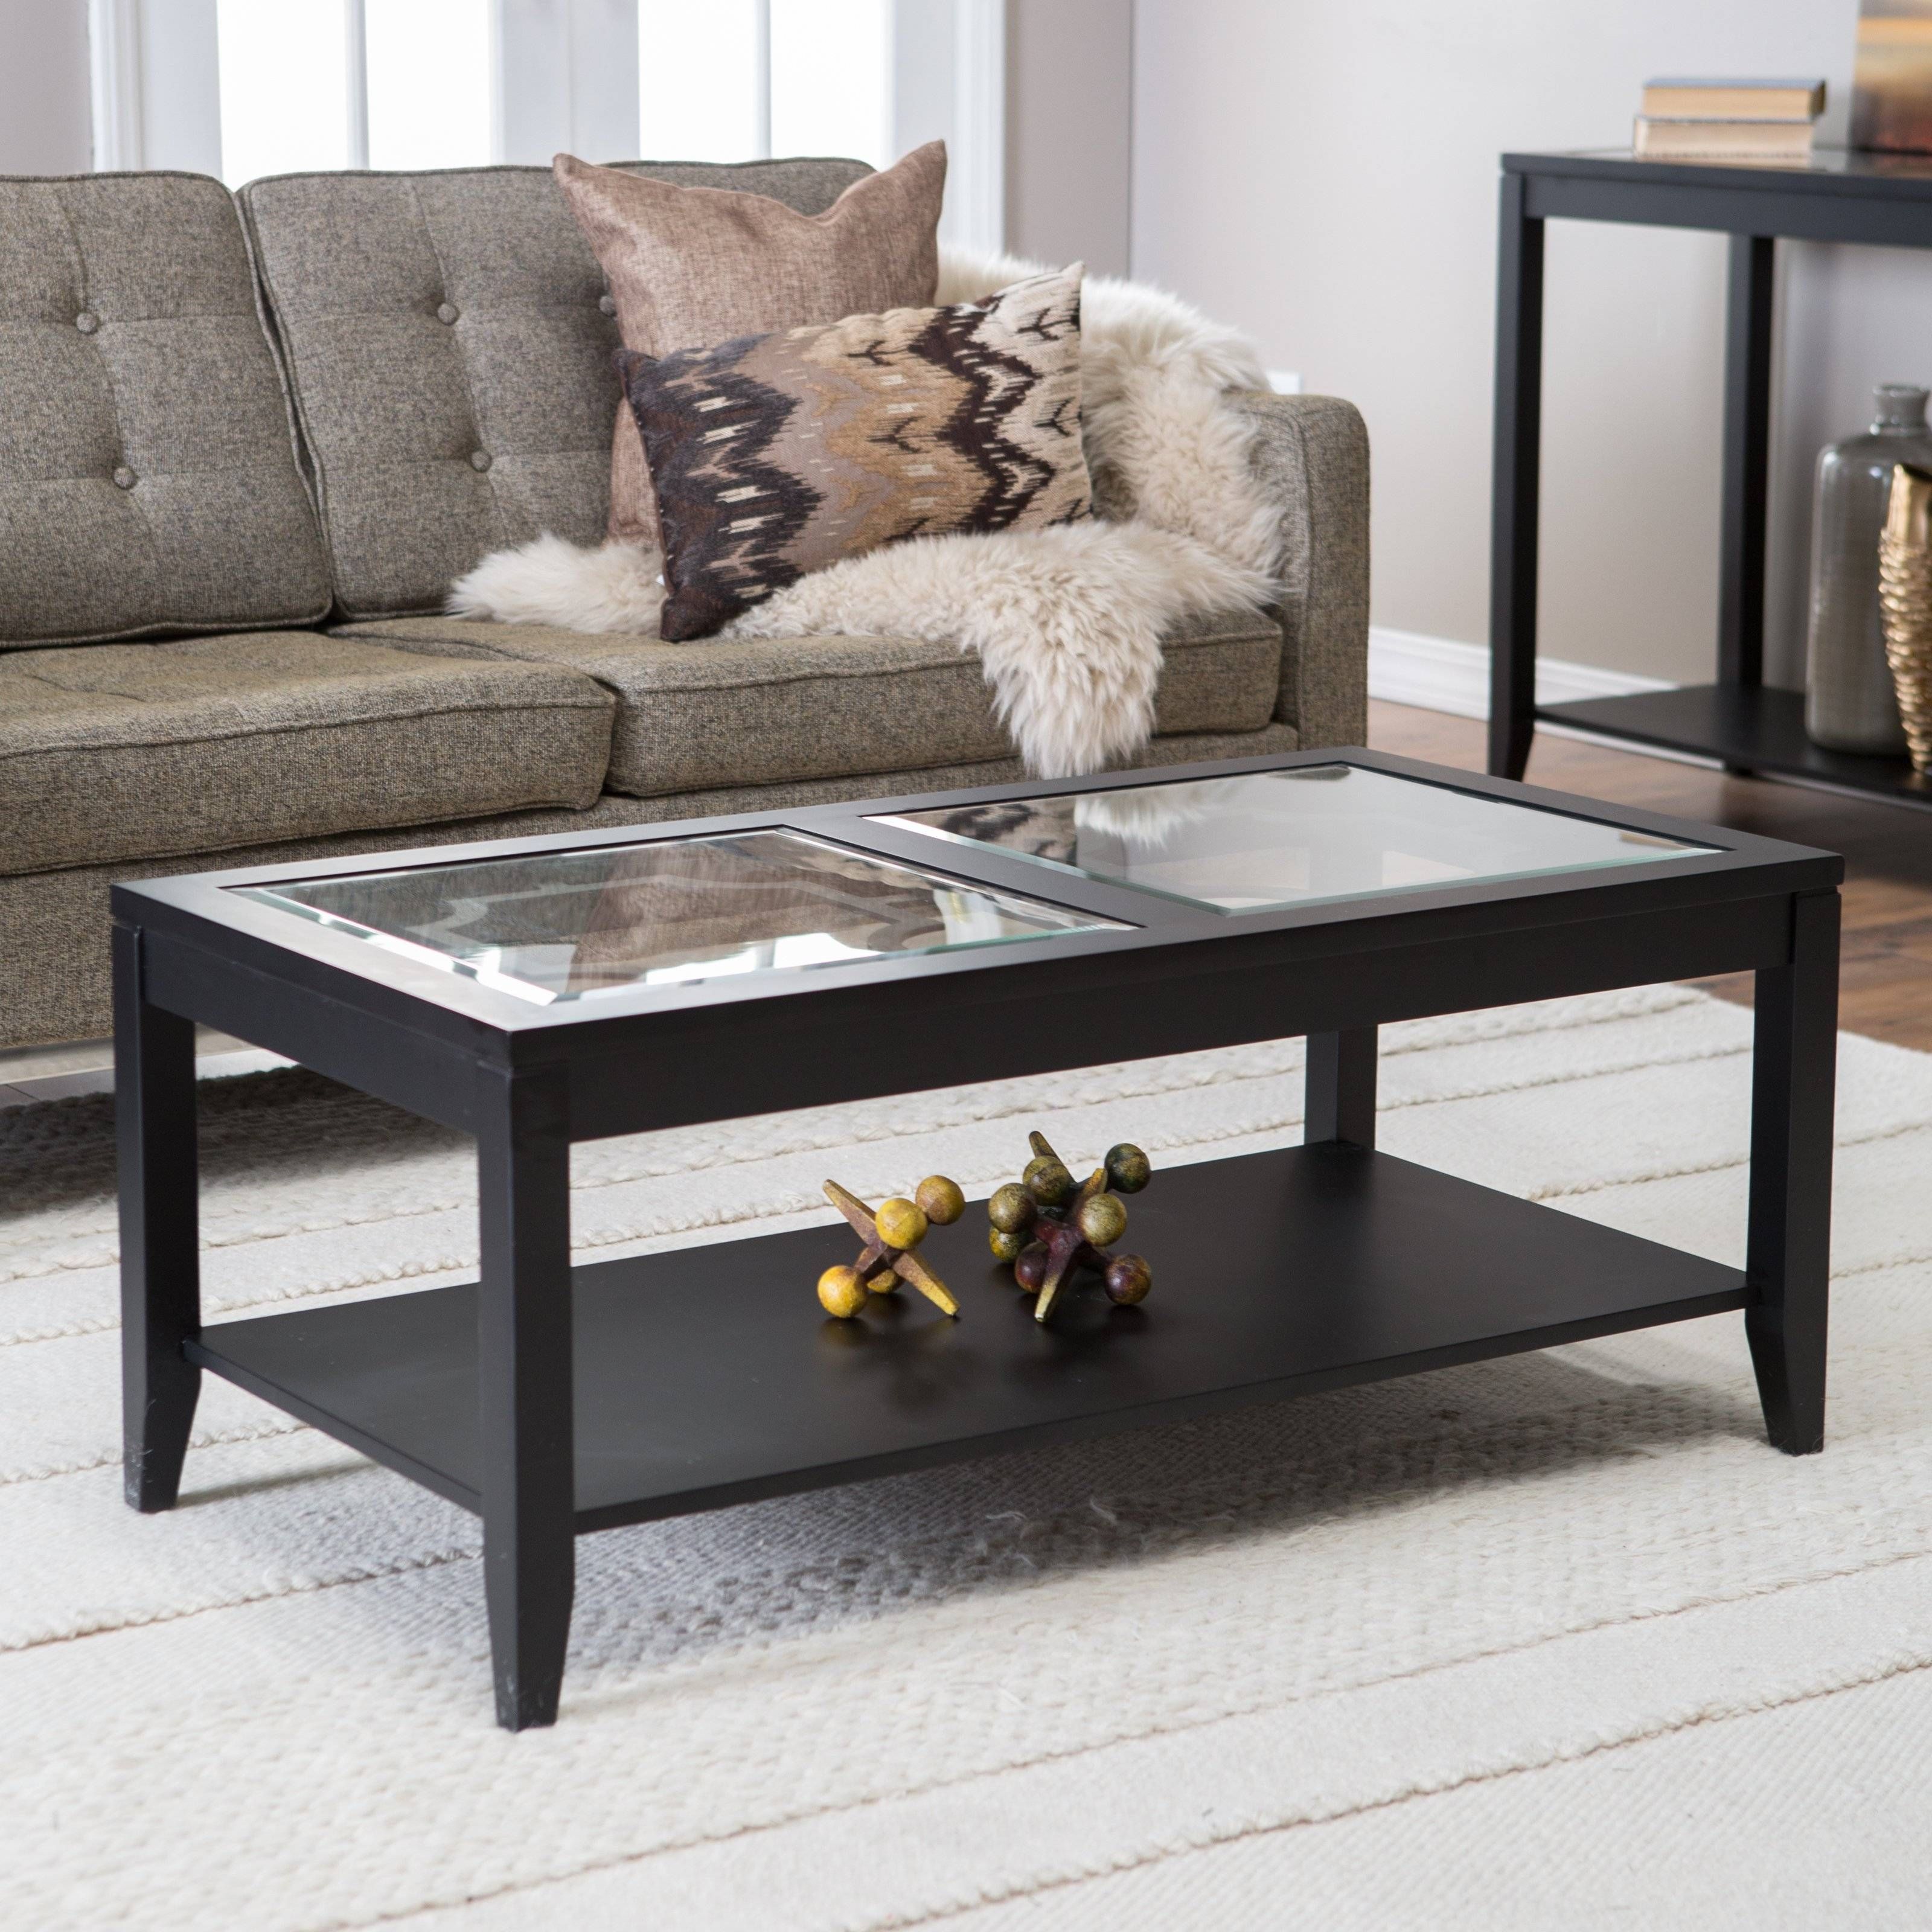 Hodedah Glass Rectangle Coffee Table, Black – Walmart With Regard To Glass And Black Coffee Tables (View 5 of 30)